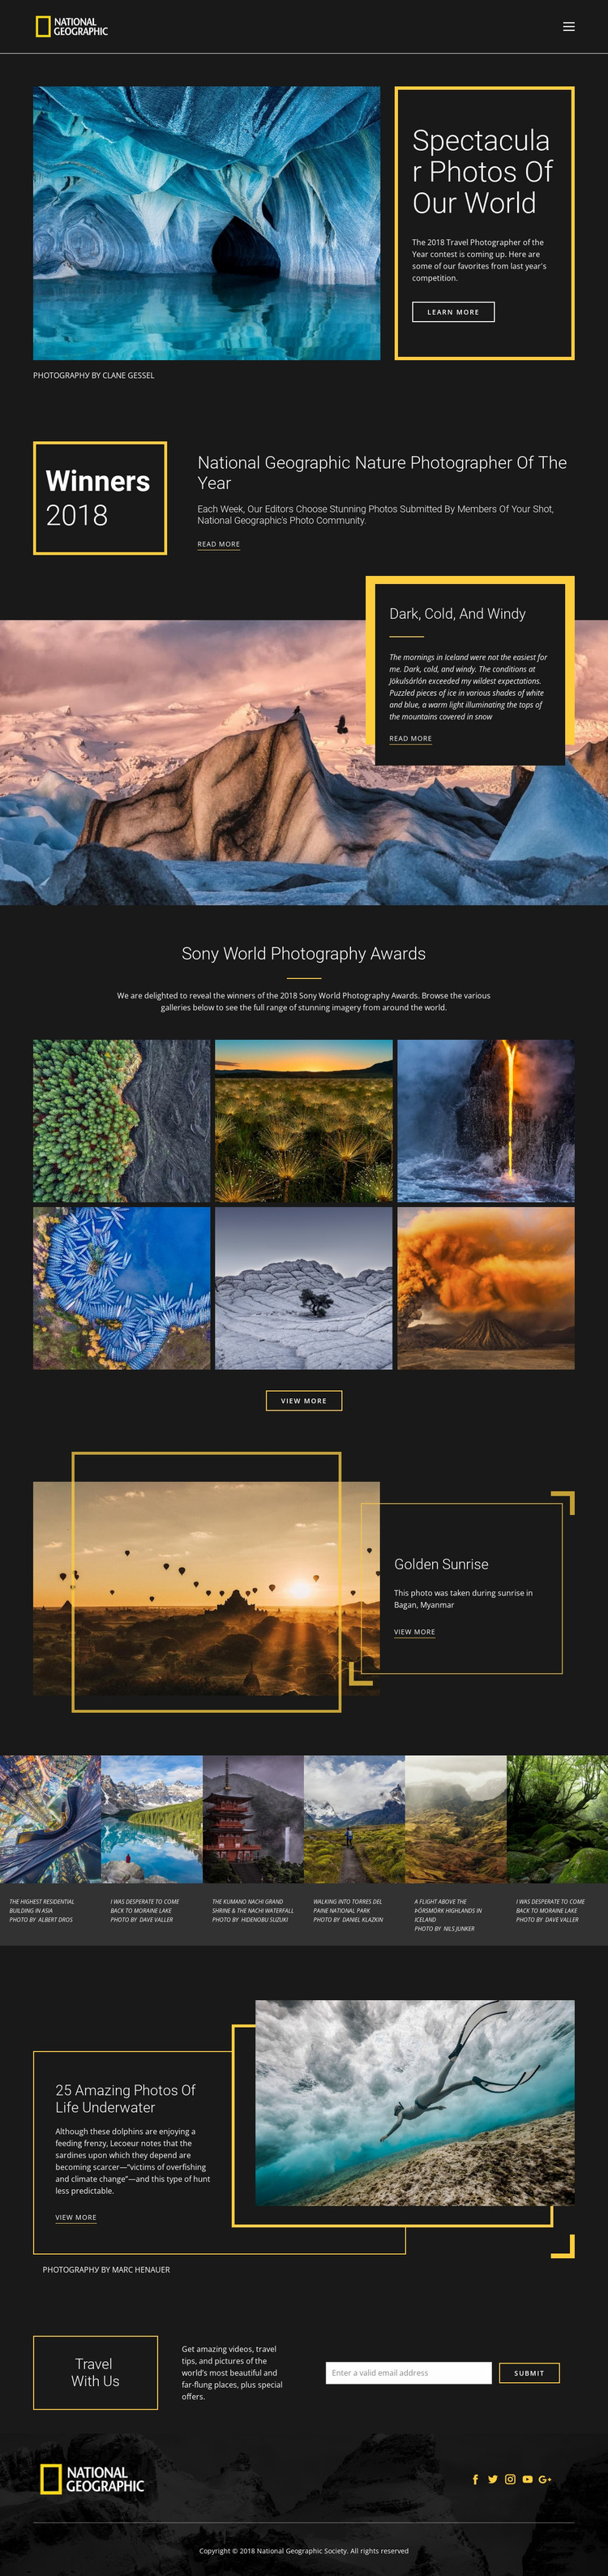 Pictures of nature Website Mockup